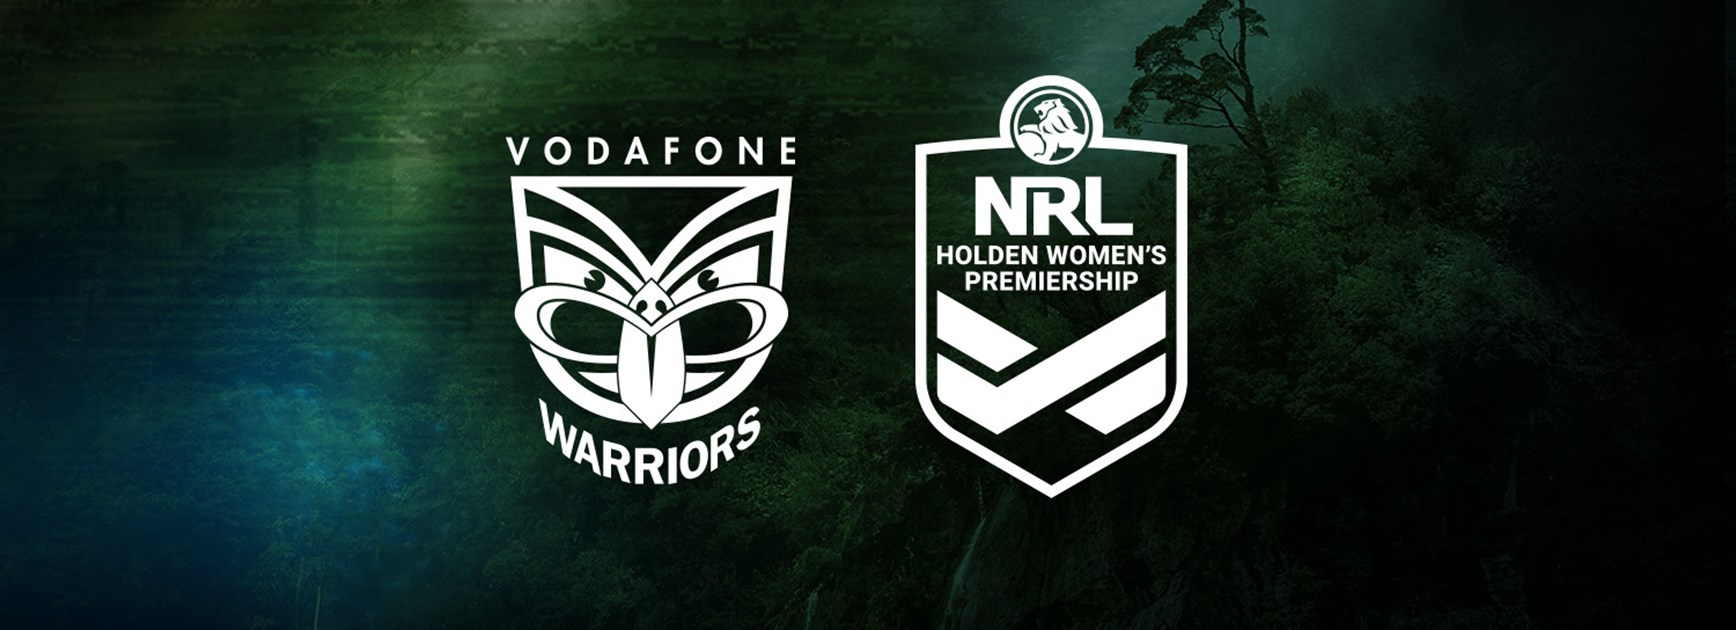 Vodafone Warriors excited to join NRL women's premiership